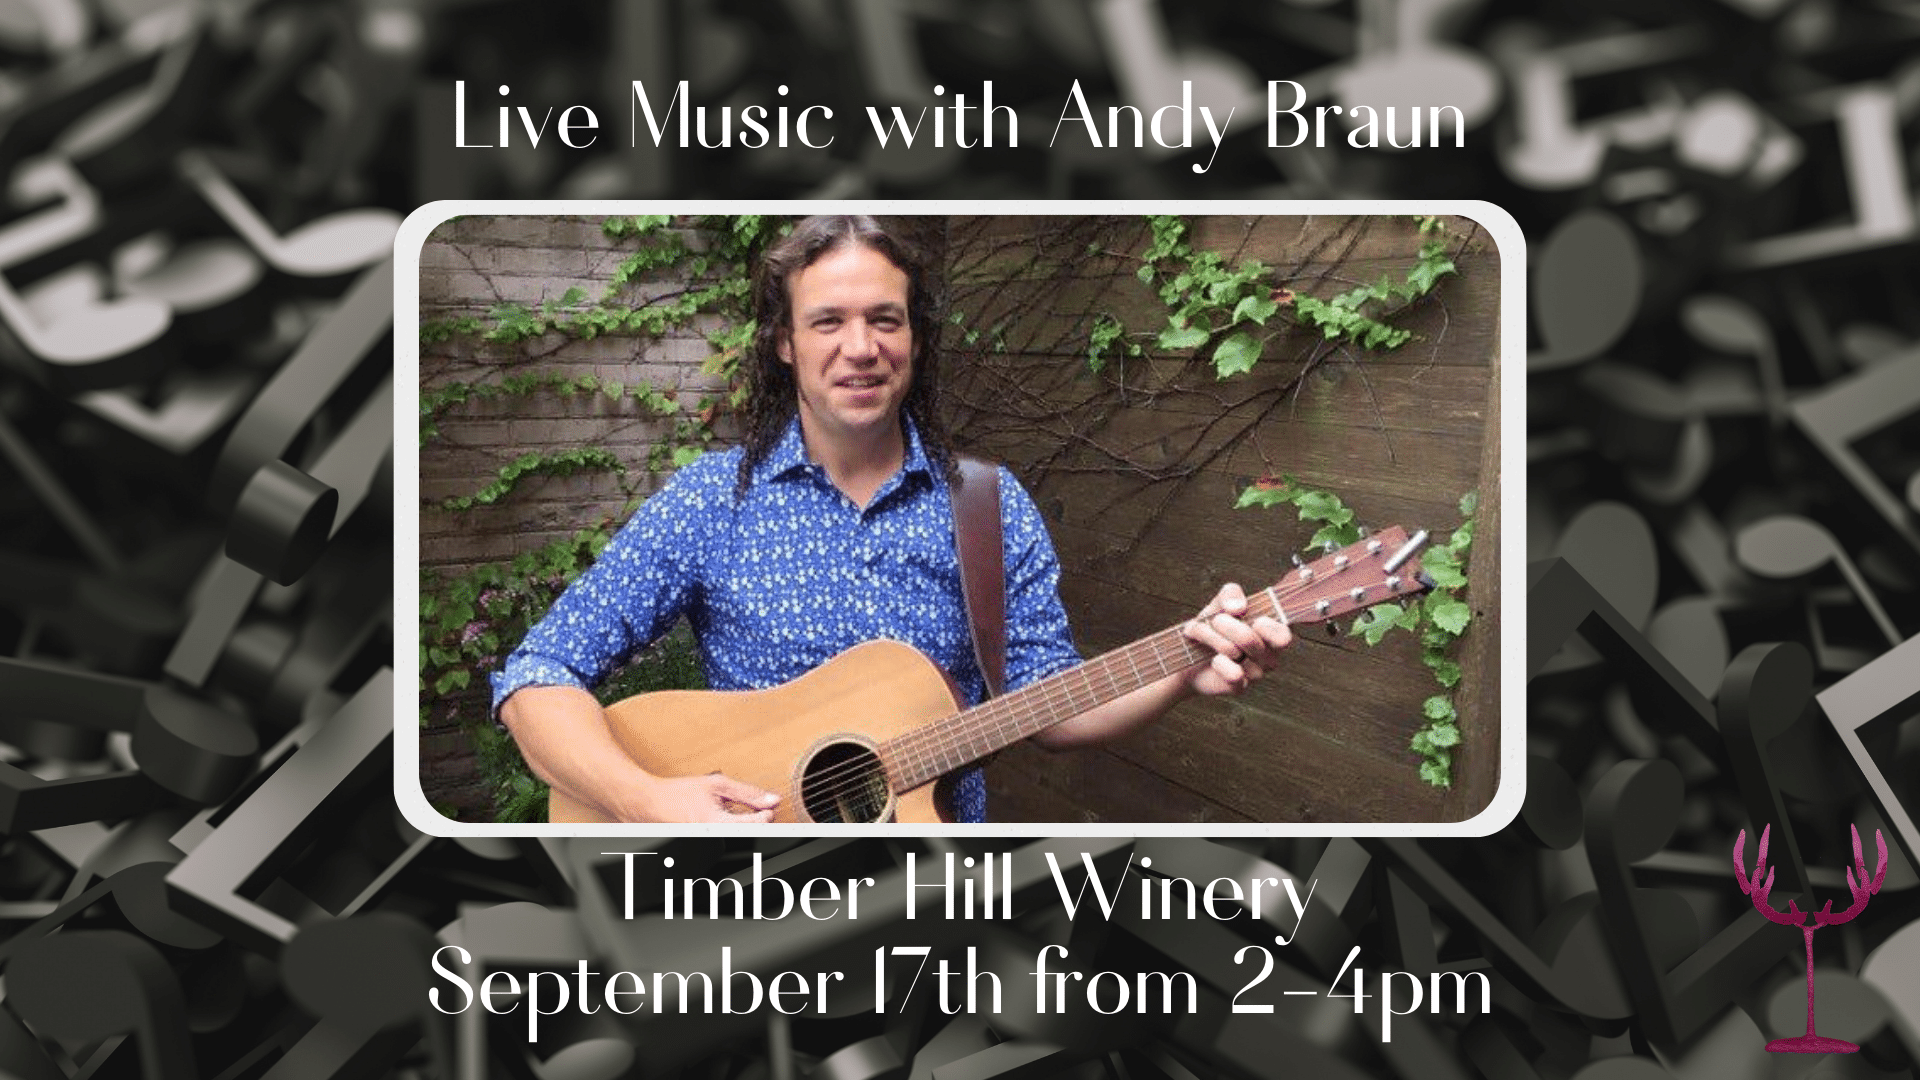 Live Music with Andy Braun